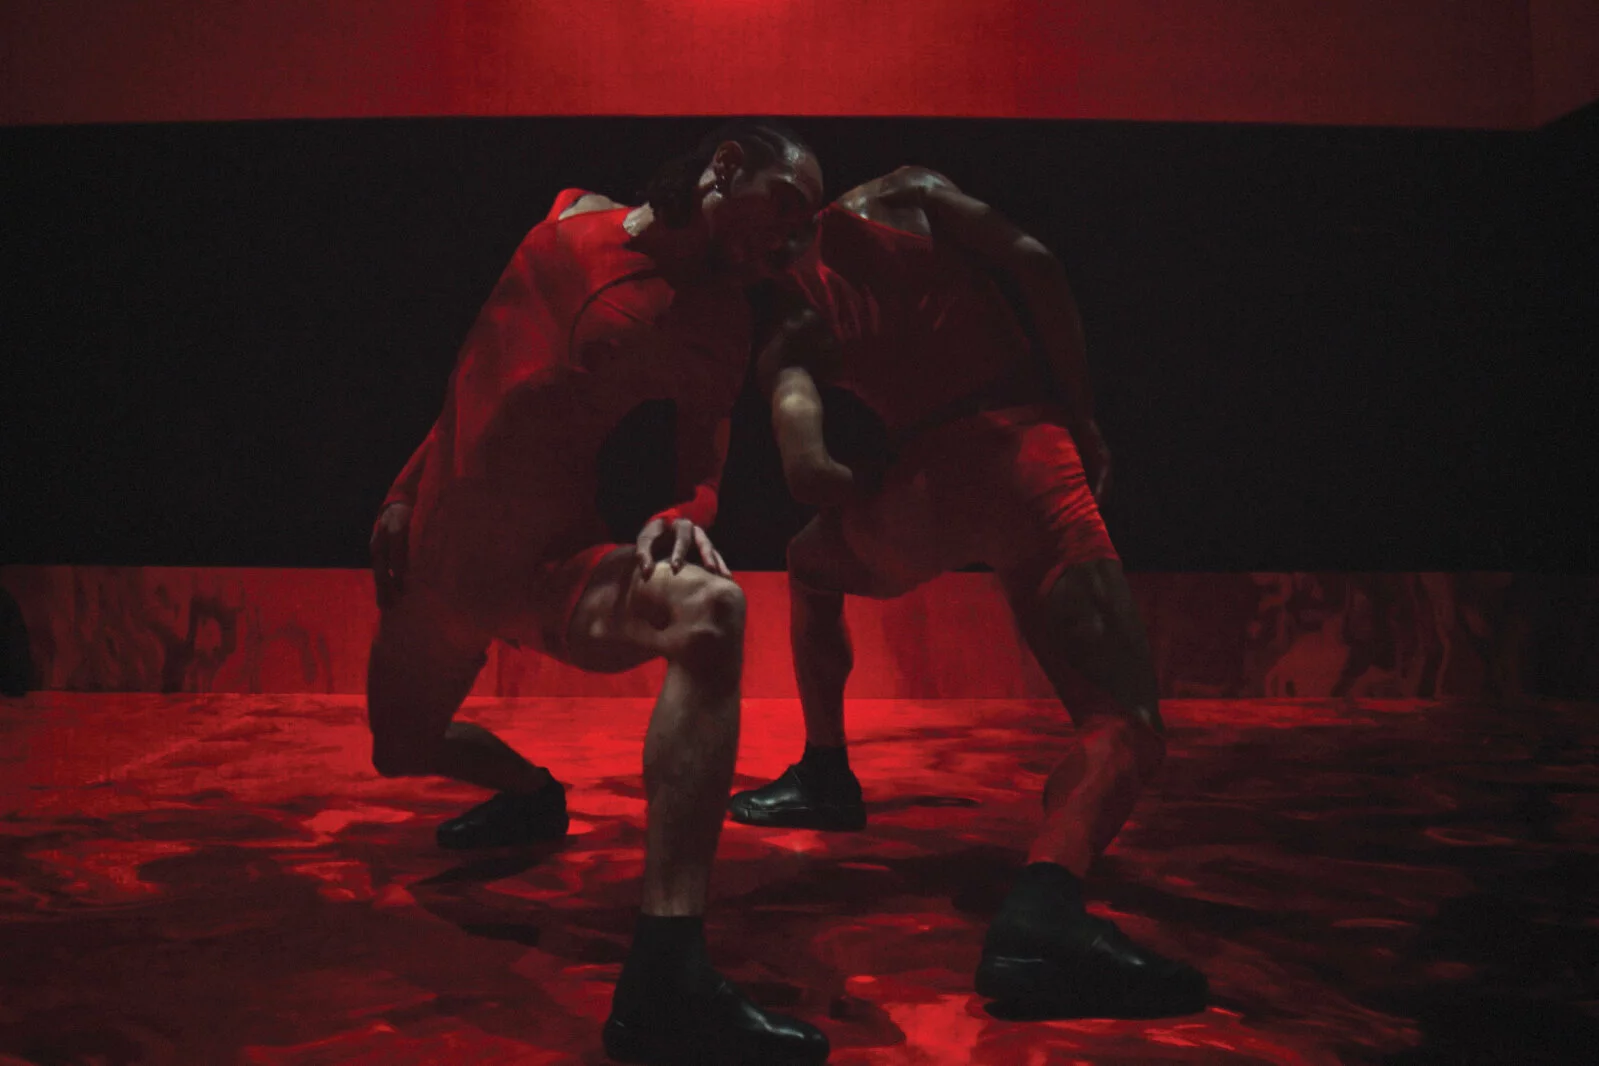 Two Black people wearing red shorts and tops crouch in a wide-legged stance and lean their hands to touch.